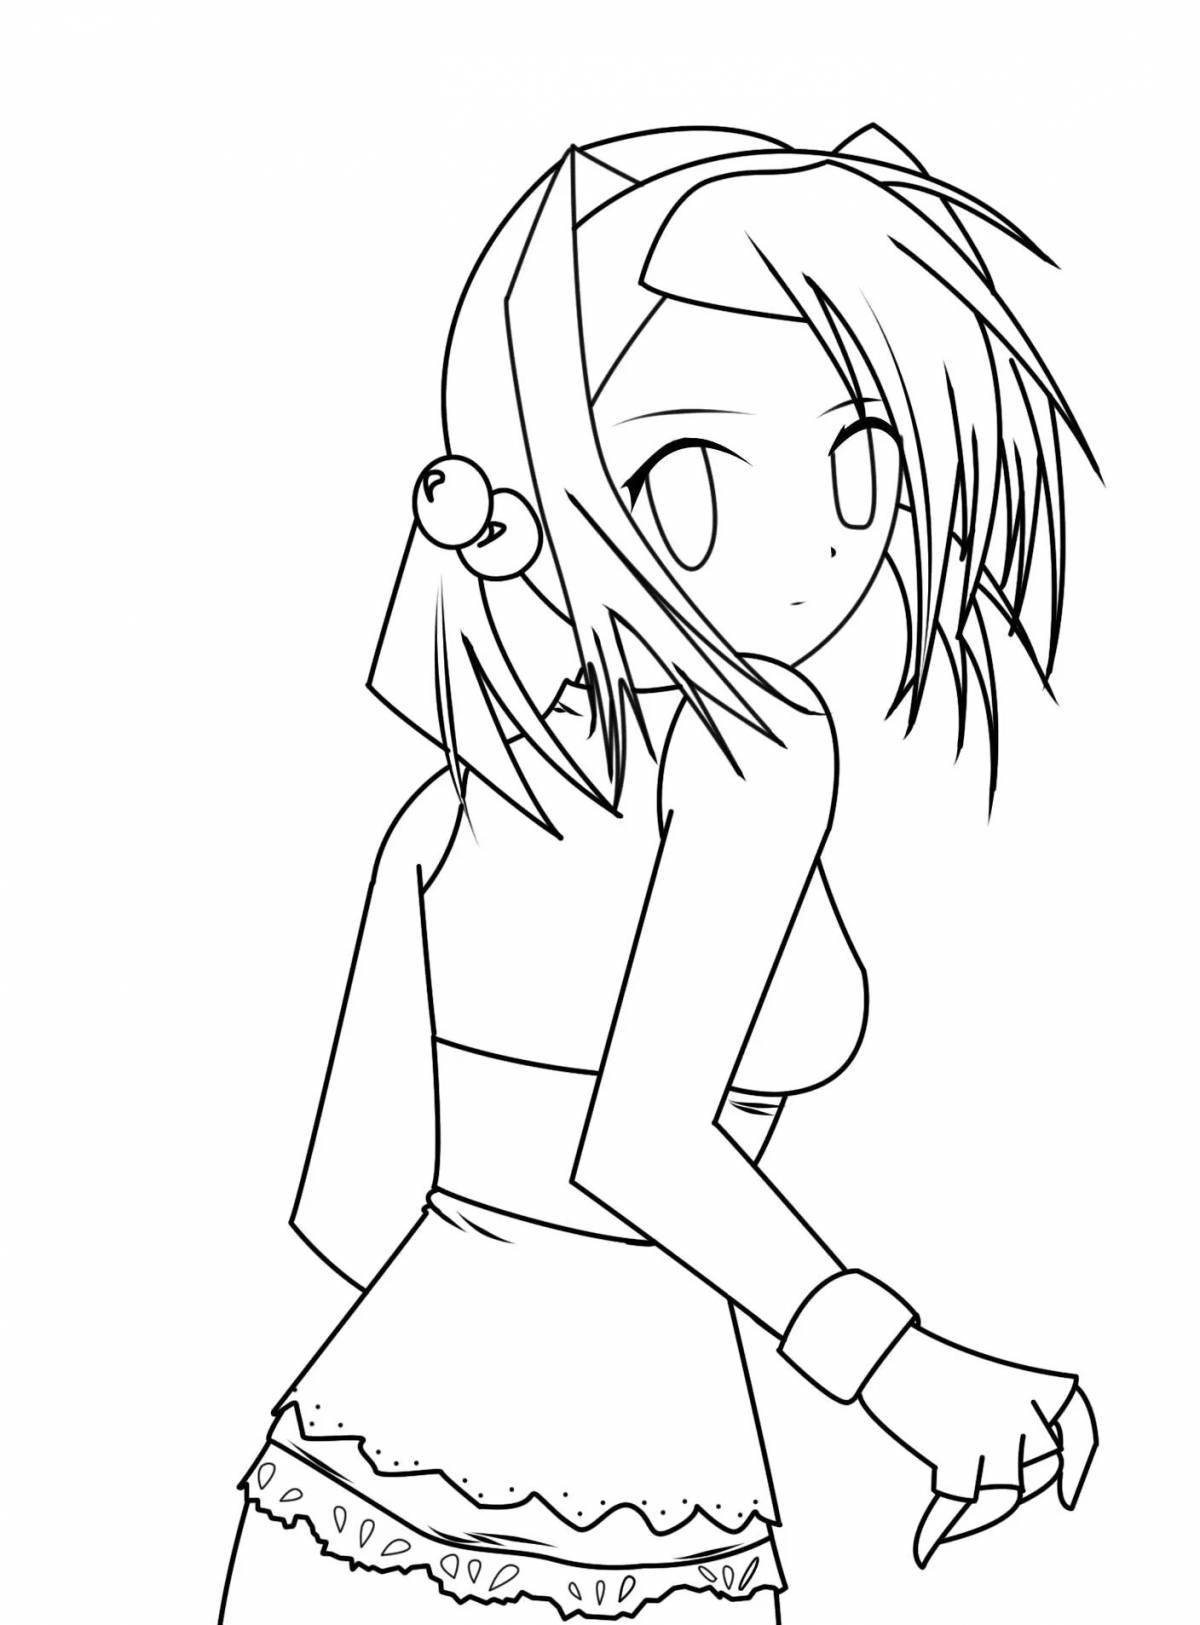 Vibrant minecraft anime coloring page